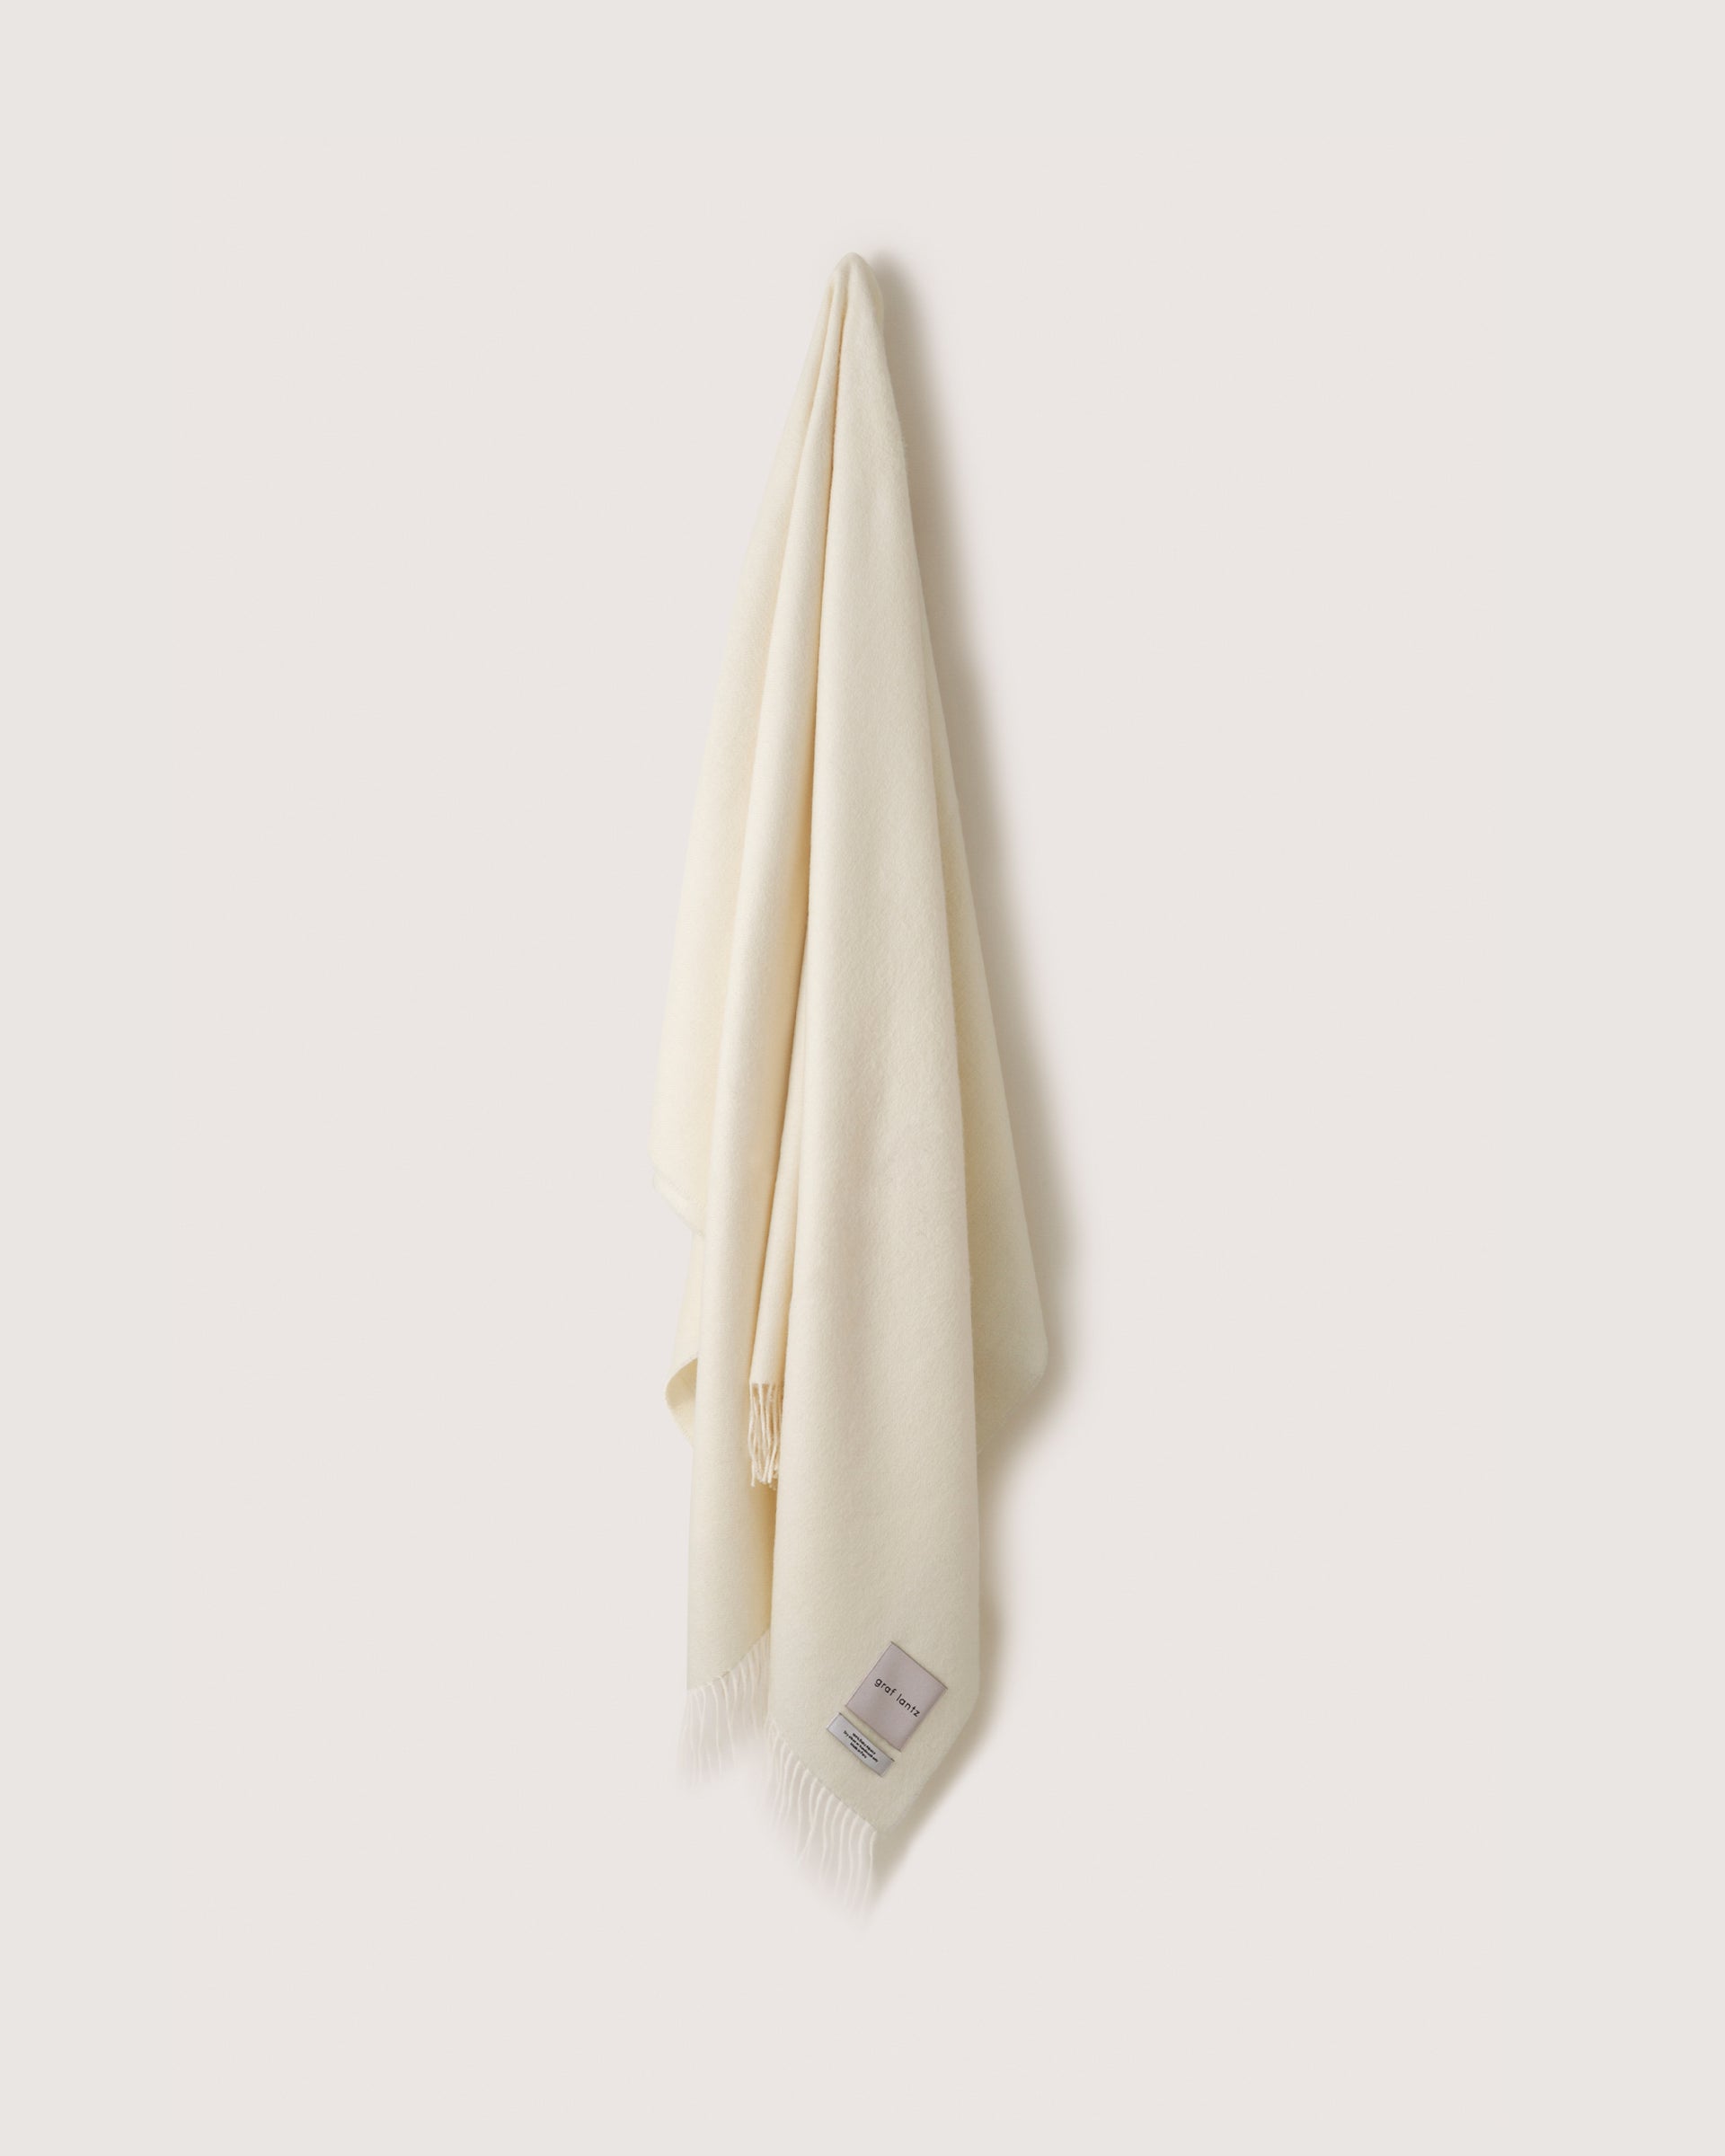 A white Alpaca throw hanging on a wall hook, white background